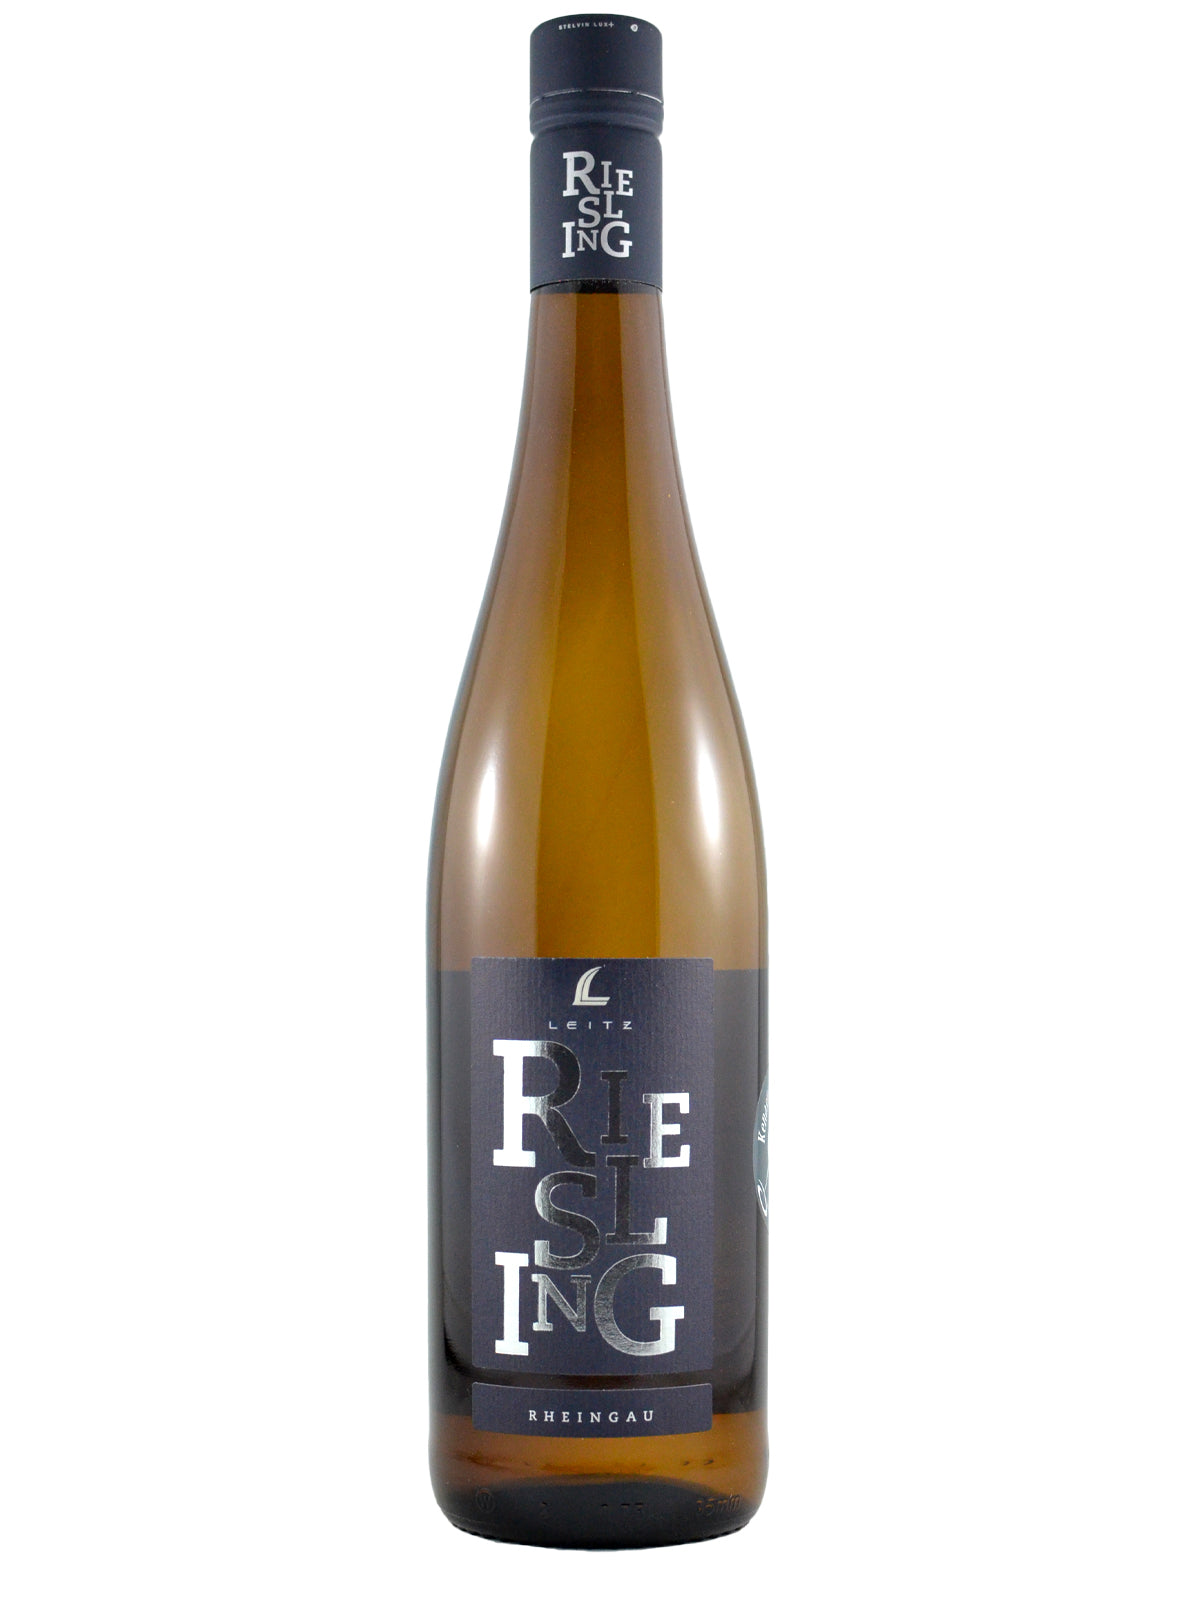 Leitz Blue Label Riesling